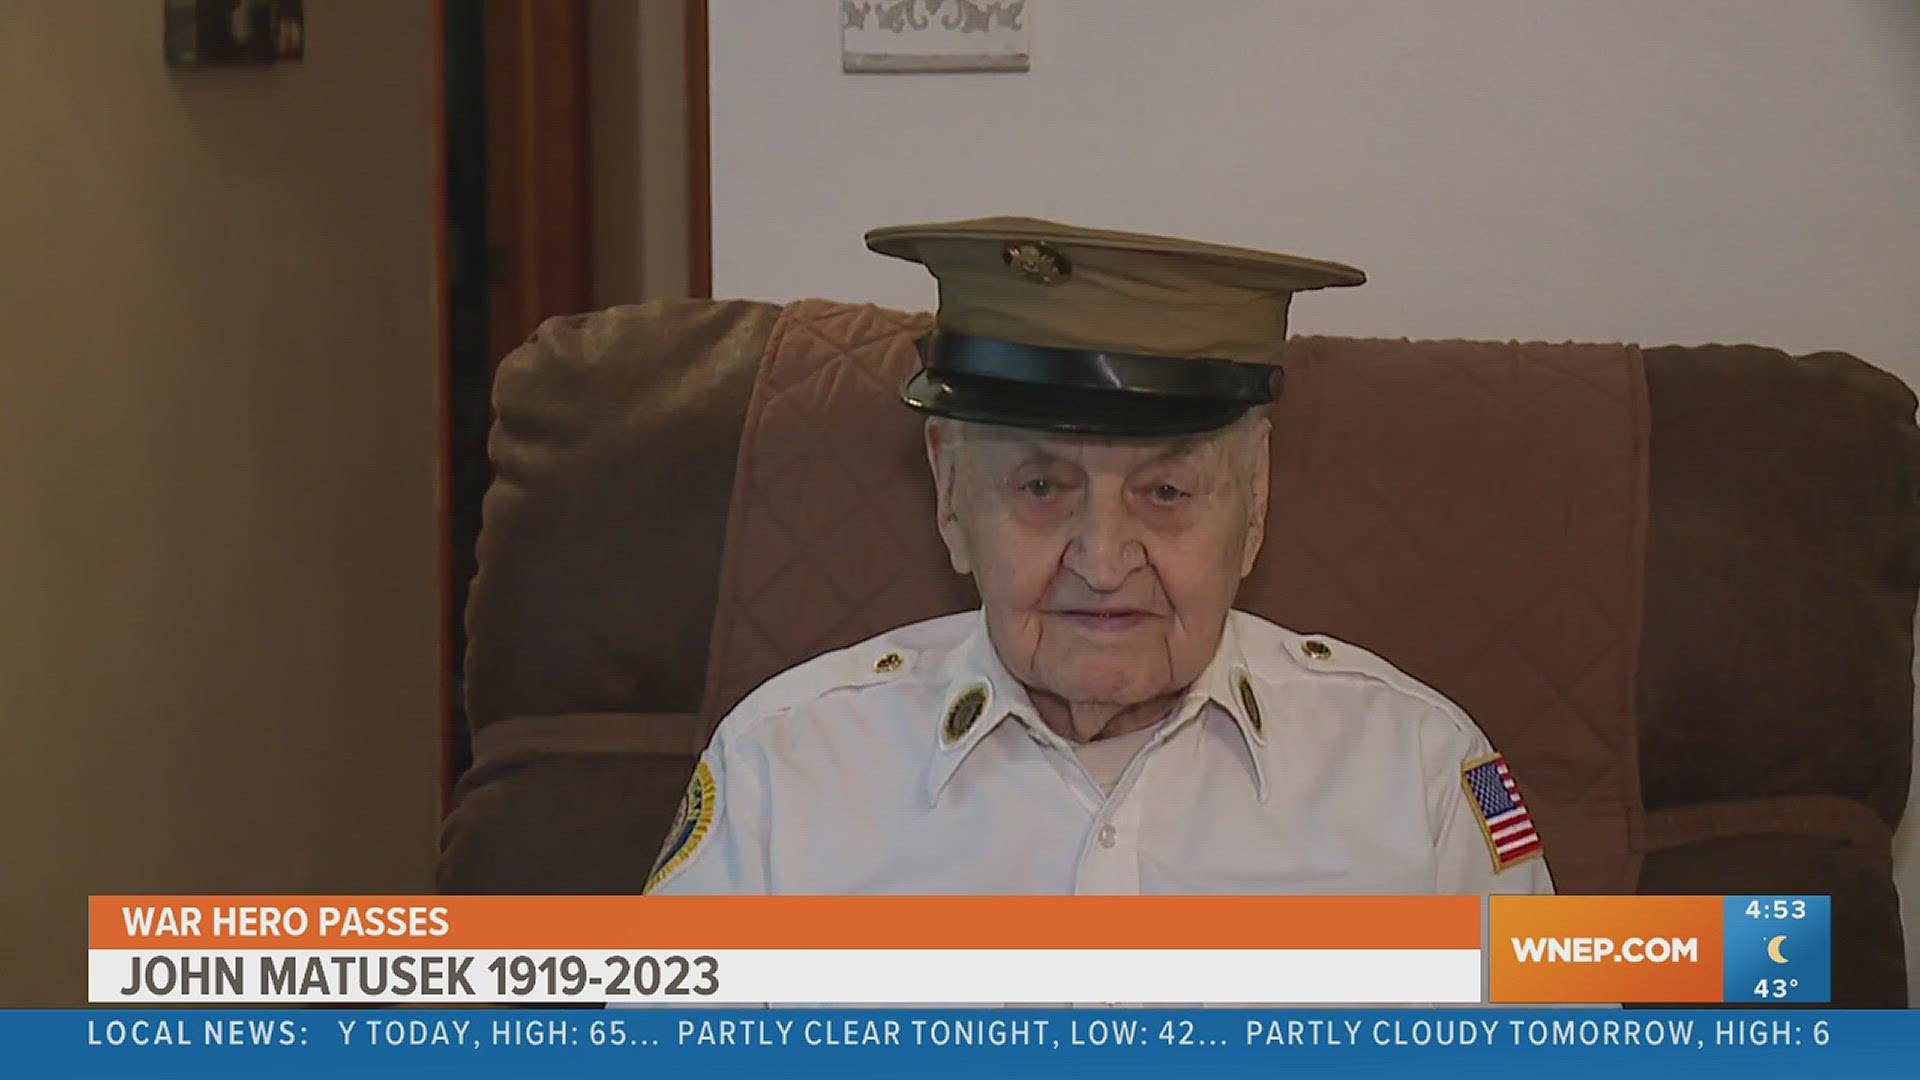 One of the oldest WWII veterans in the country died this week